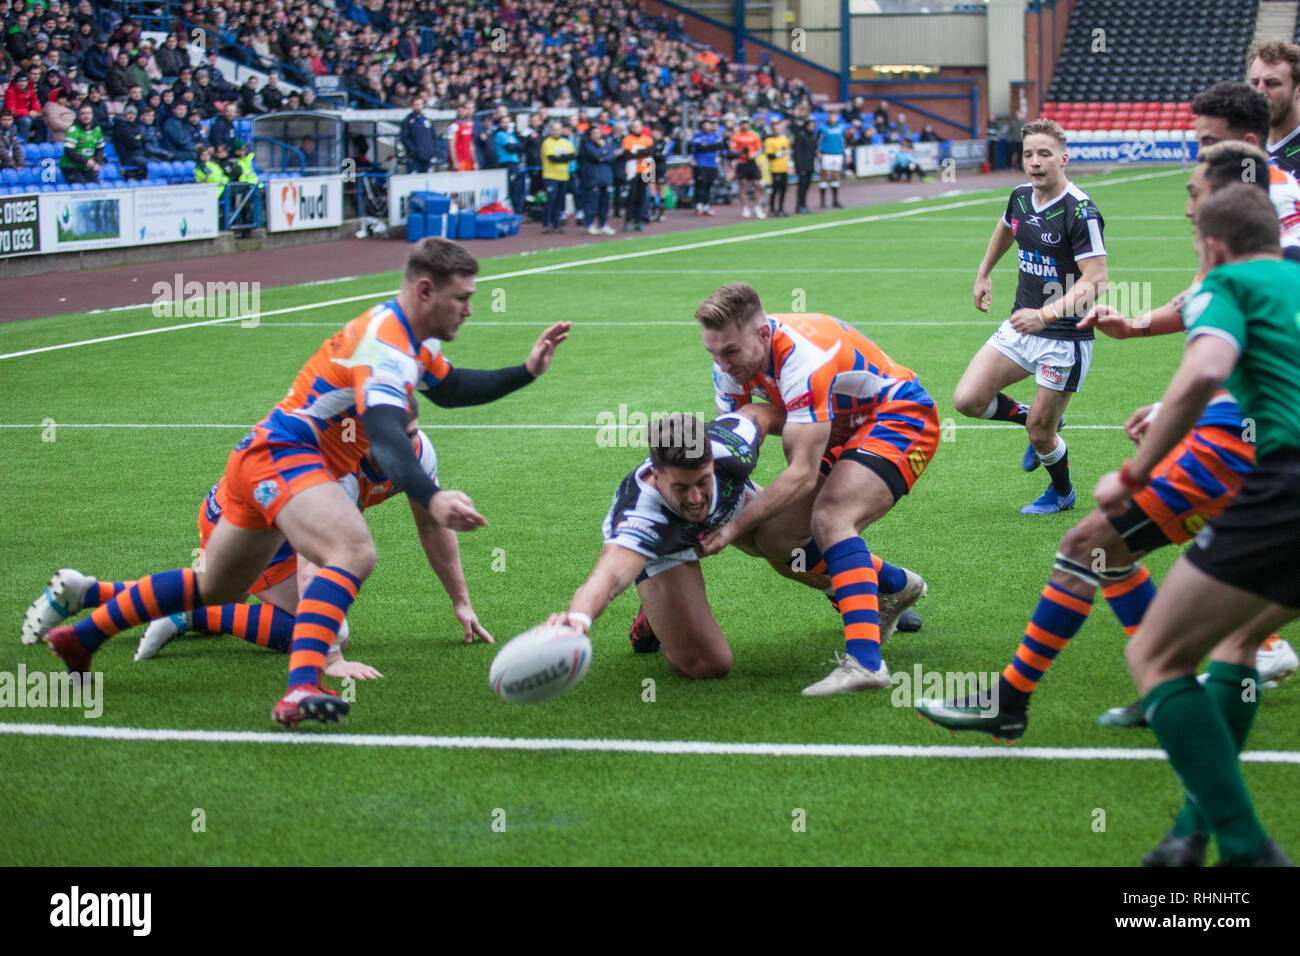 Anthony Gelling scores his first try of the afternoon. Widnes Vikings vs Halifax RLFC 3rd February 2019 Stock Photo